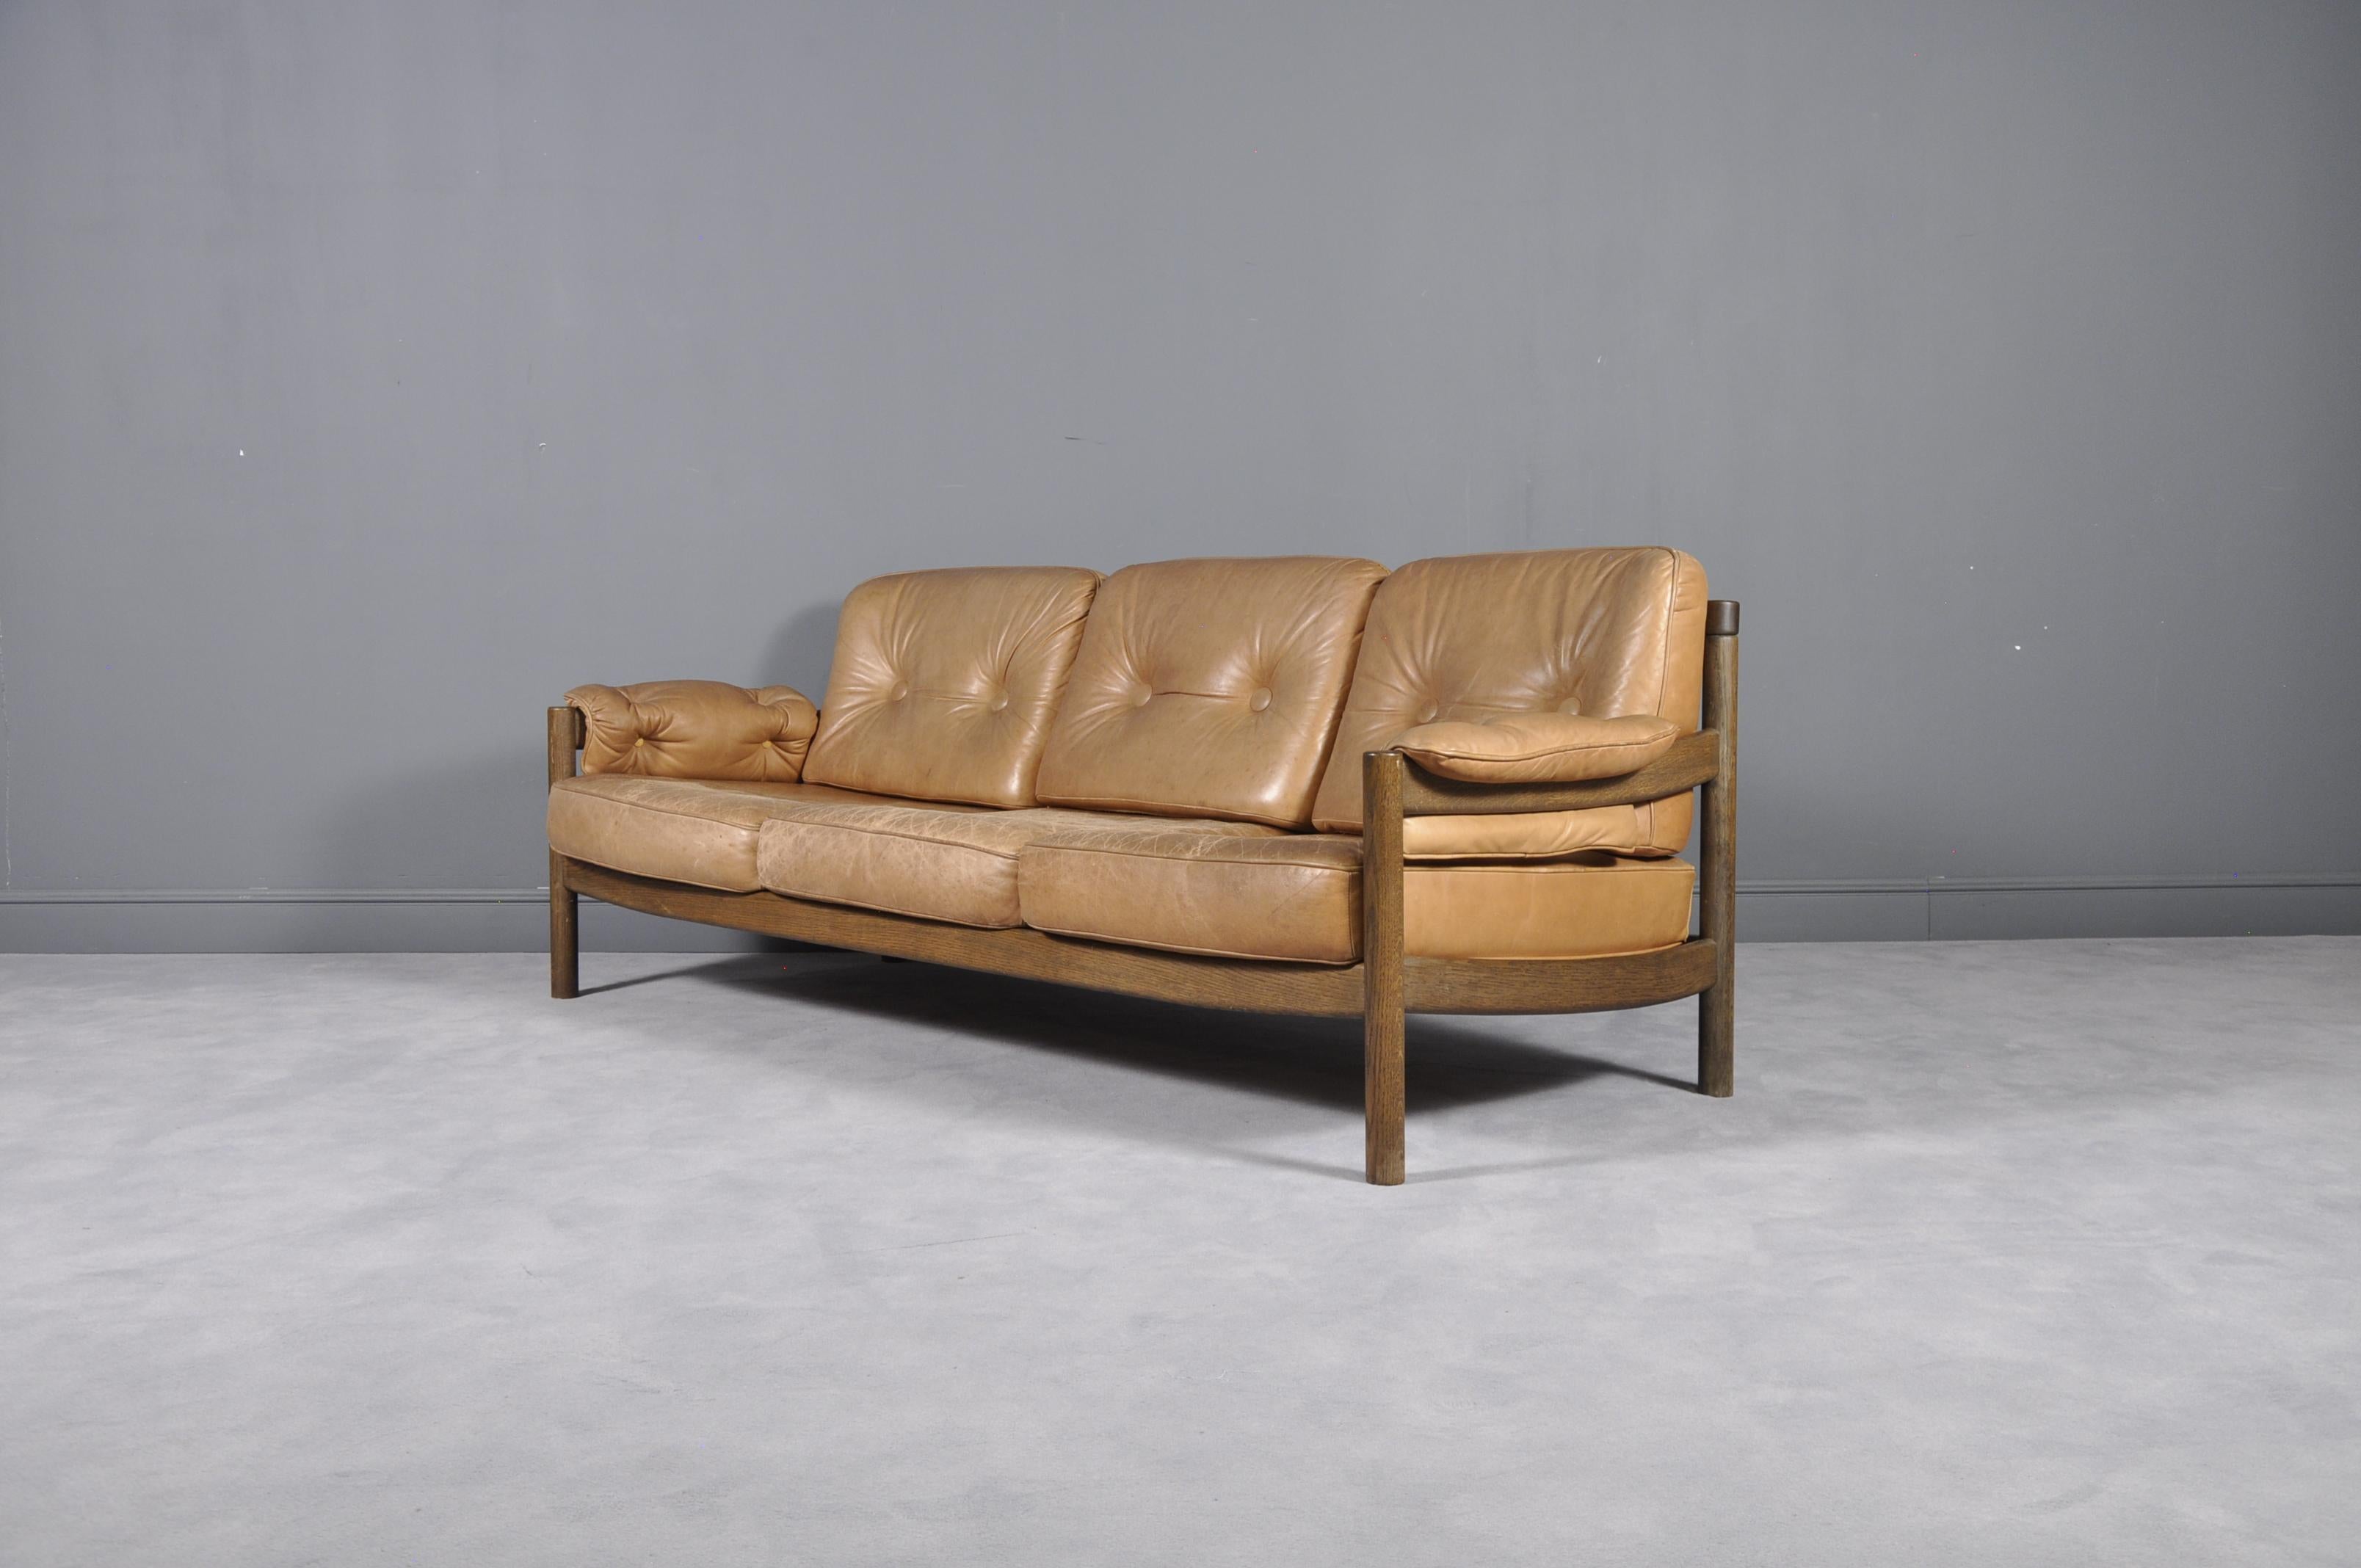 - Comfortable 3-seat sofa from the 1960s
- Original cognac color leather with patina 
- Solid wooden frame.